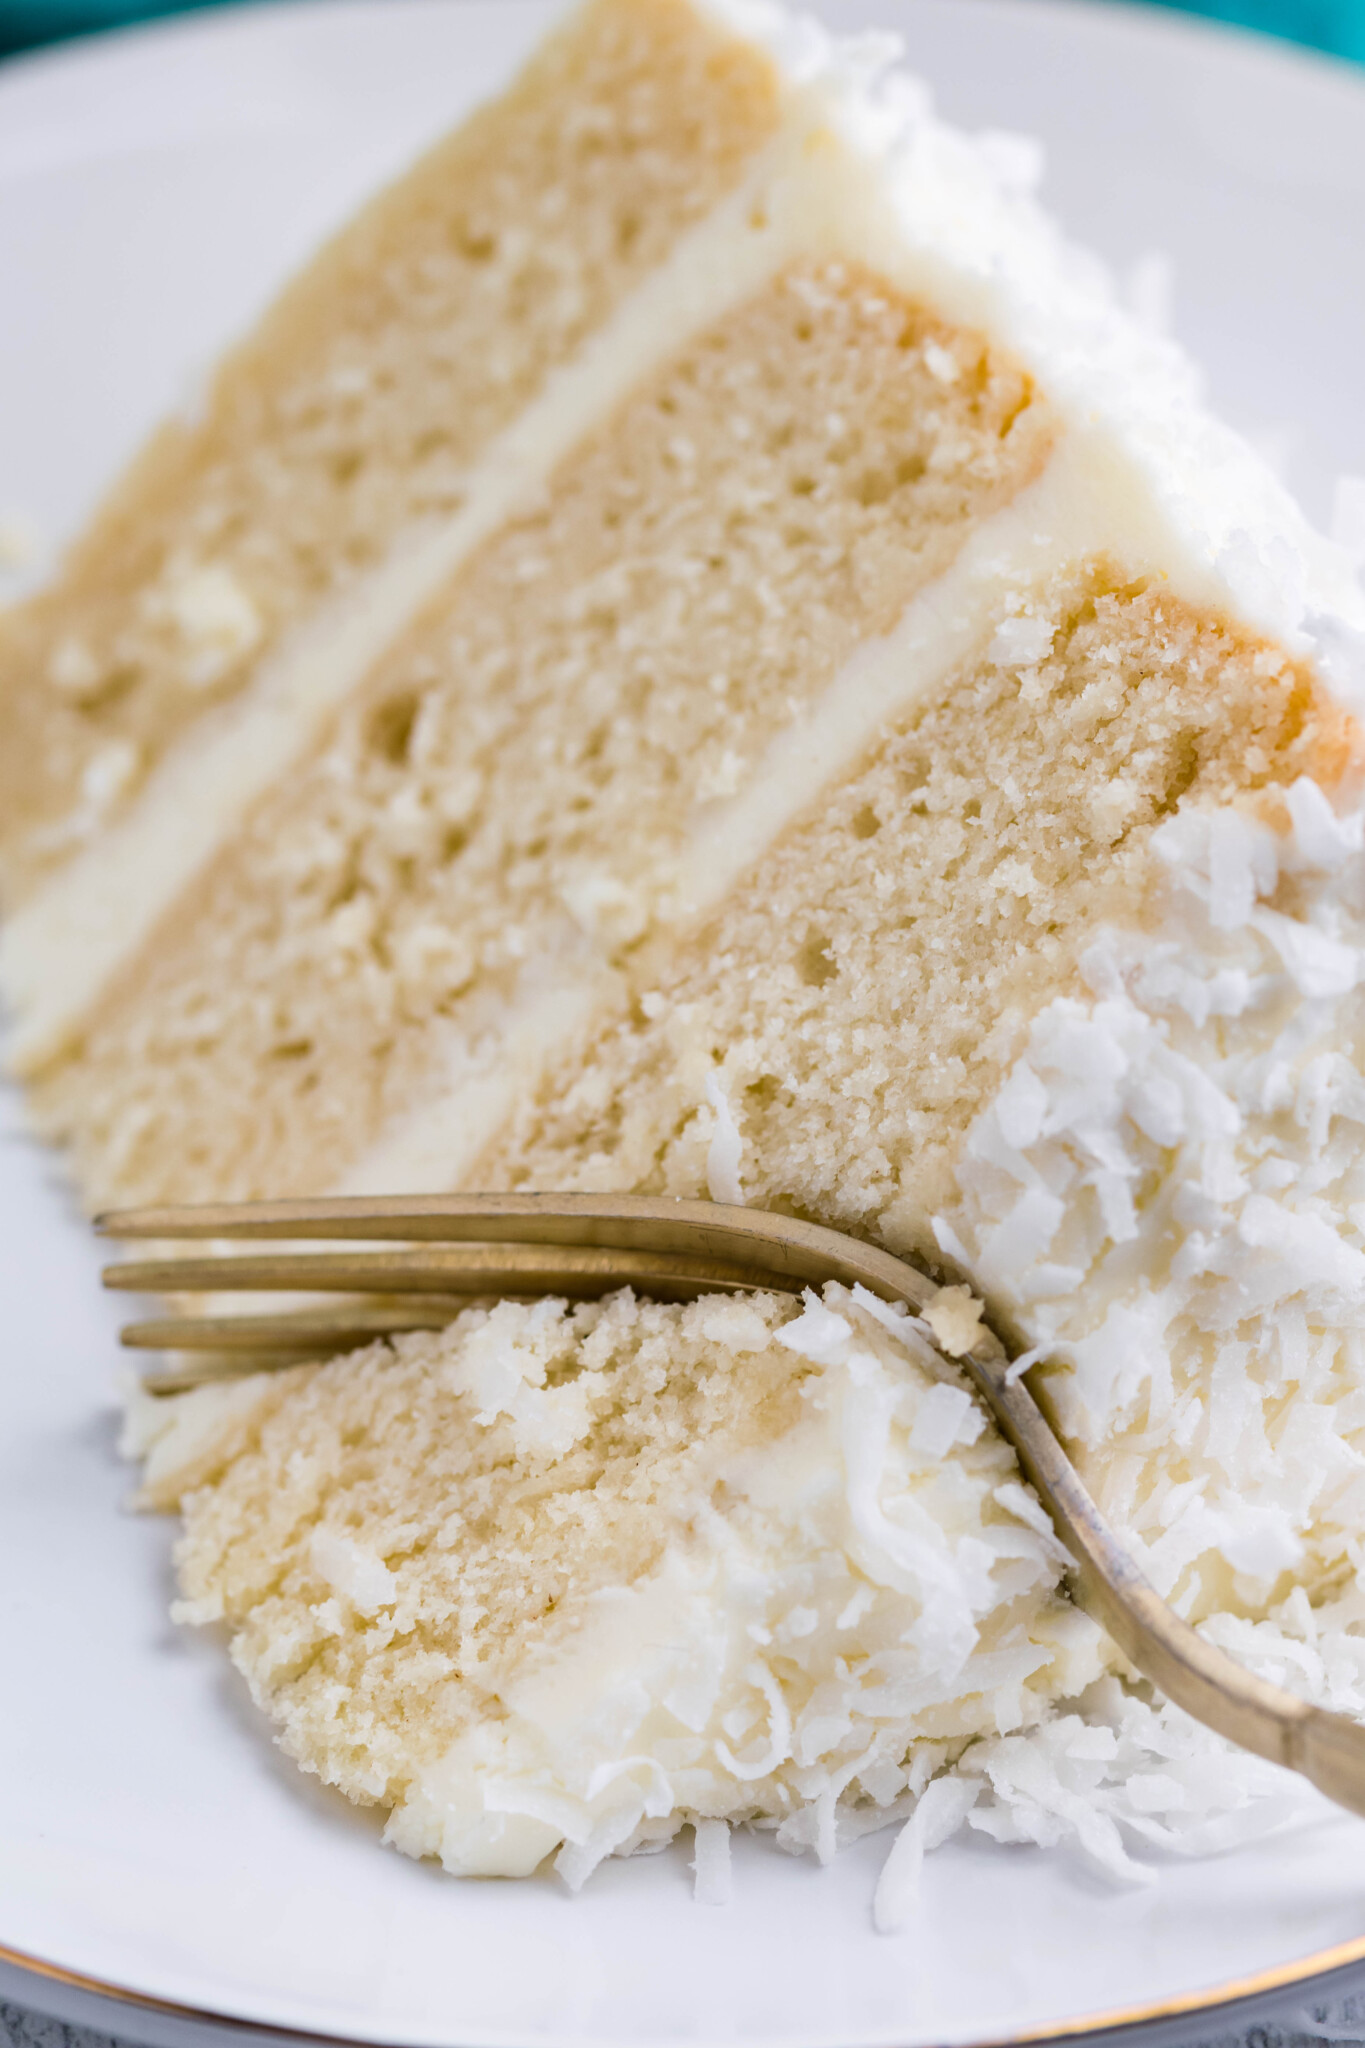 Close up view of a slice of Coconut Cake on a white plate served with a gold fork removing a bite.